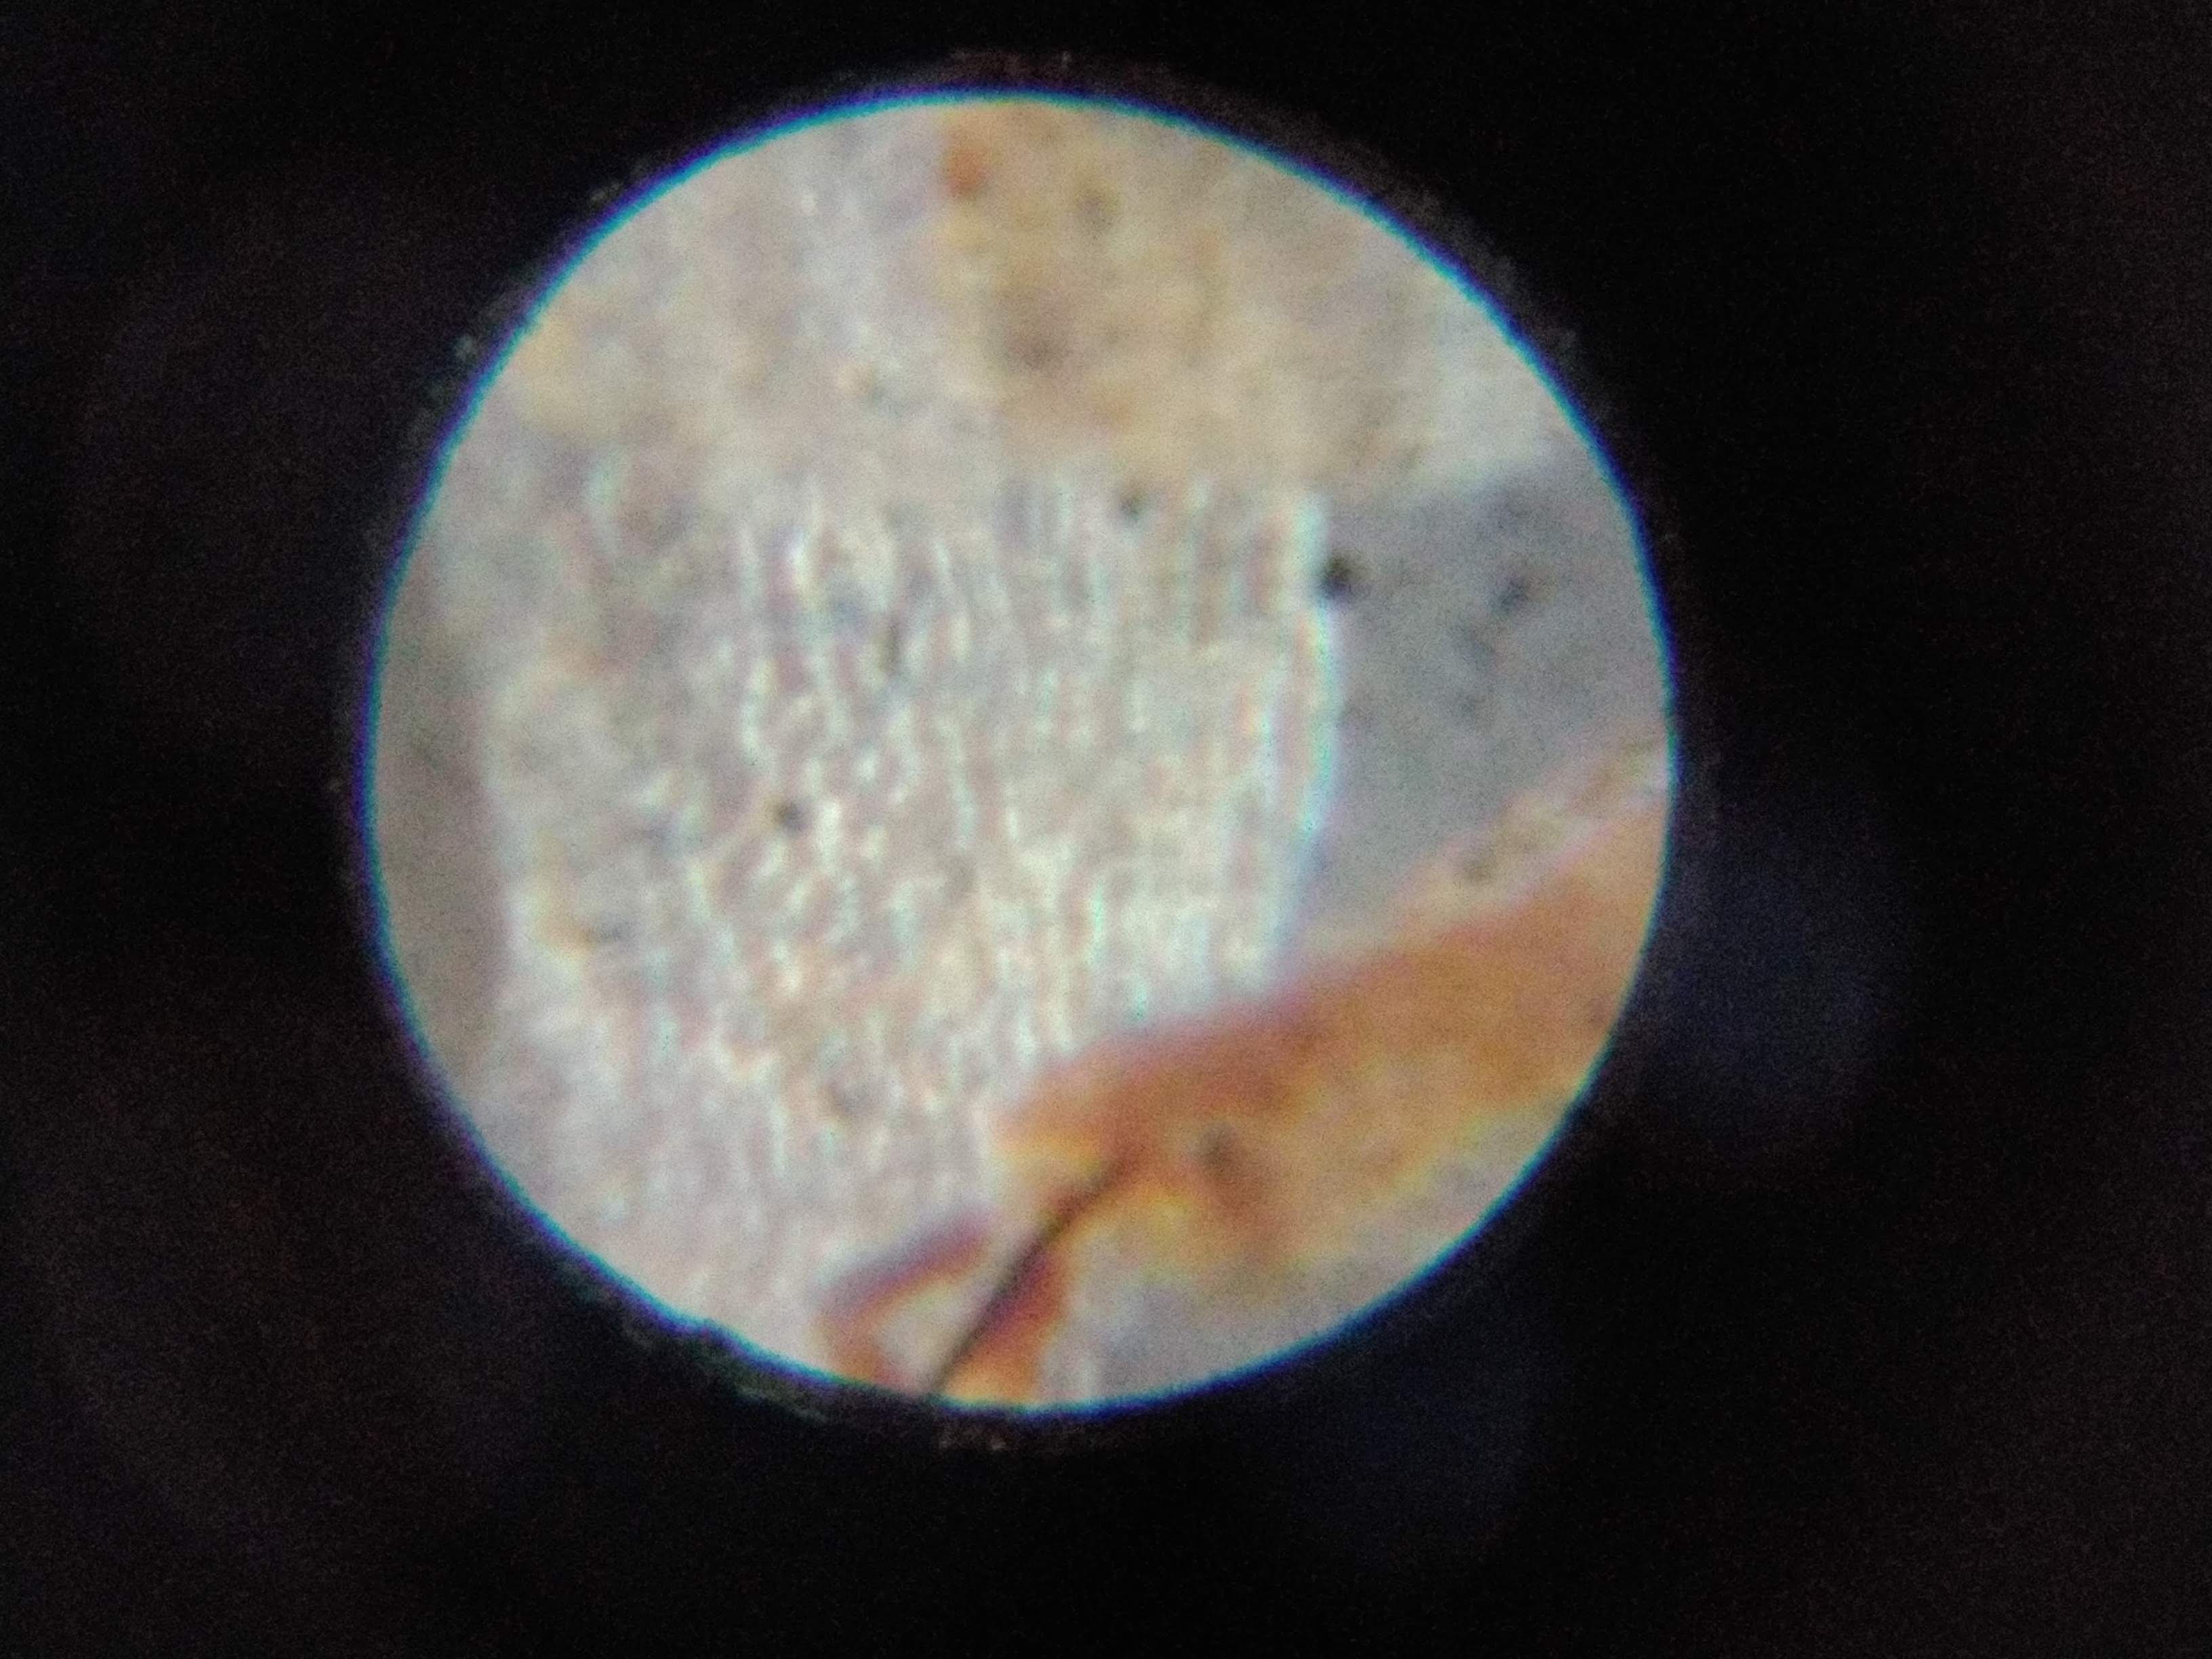 Some debris seen from the micro-micro-scope